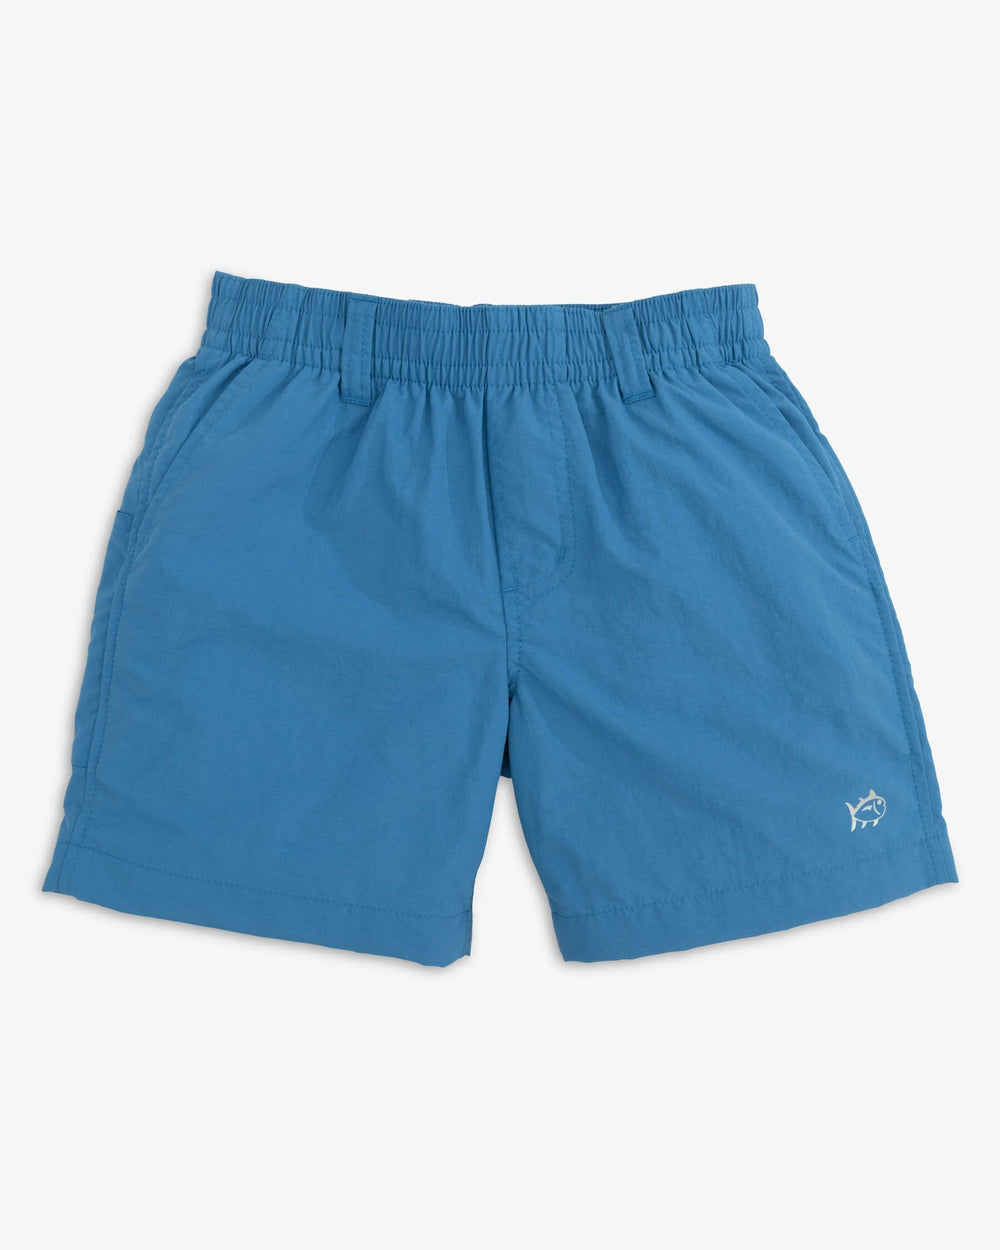 The front view of the Southern Tide Boys Shoreline Active Short by Southern Tide - Atlantic Blue